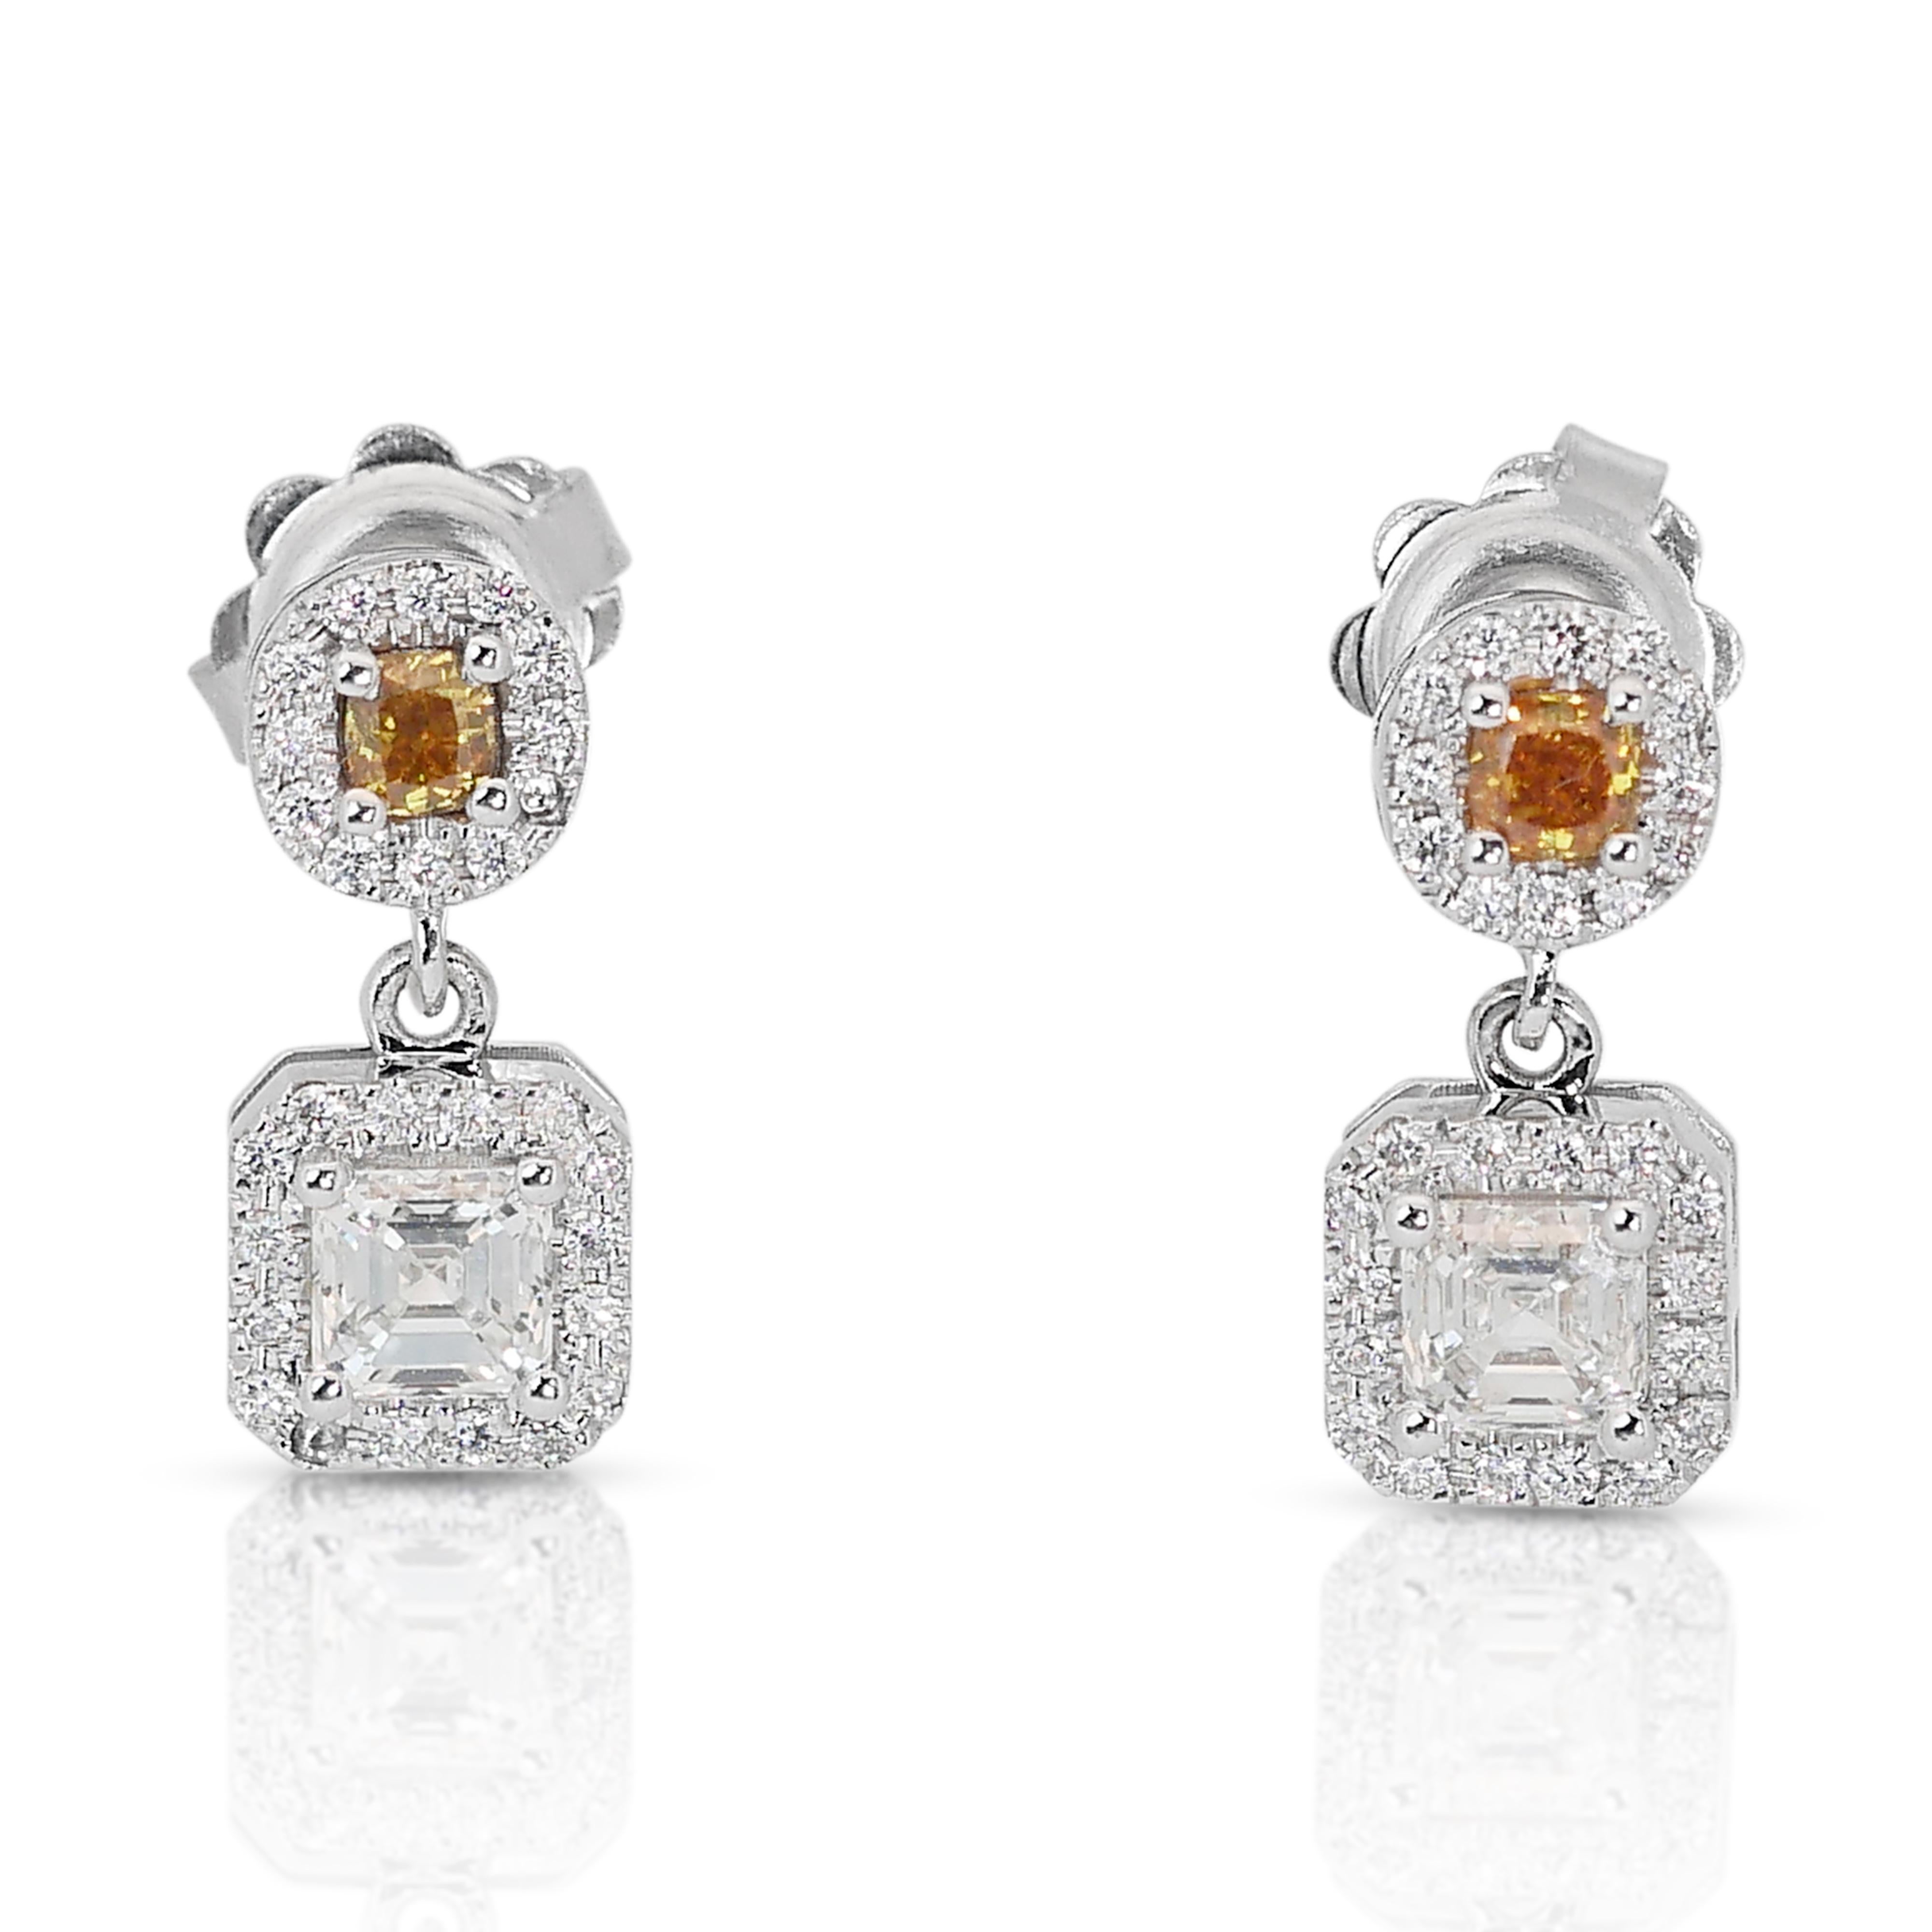 Discover the epitome of elegance with these exquisite 14k white gold drop earrings, featuring a mesmerizing array of diamonds. Anchored by 2 square-cut main diamonds totaling 0.80 carats. Complementing the main stones are 2 cushion-cut diamonds in